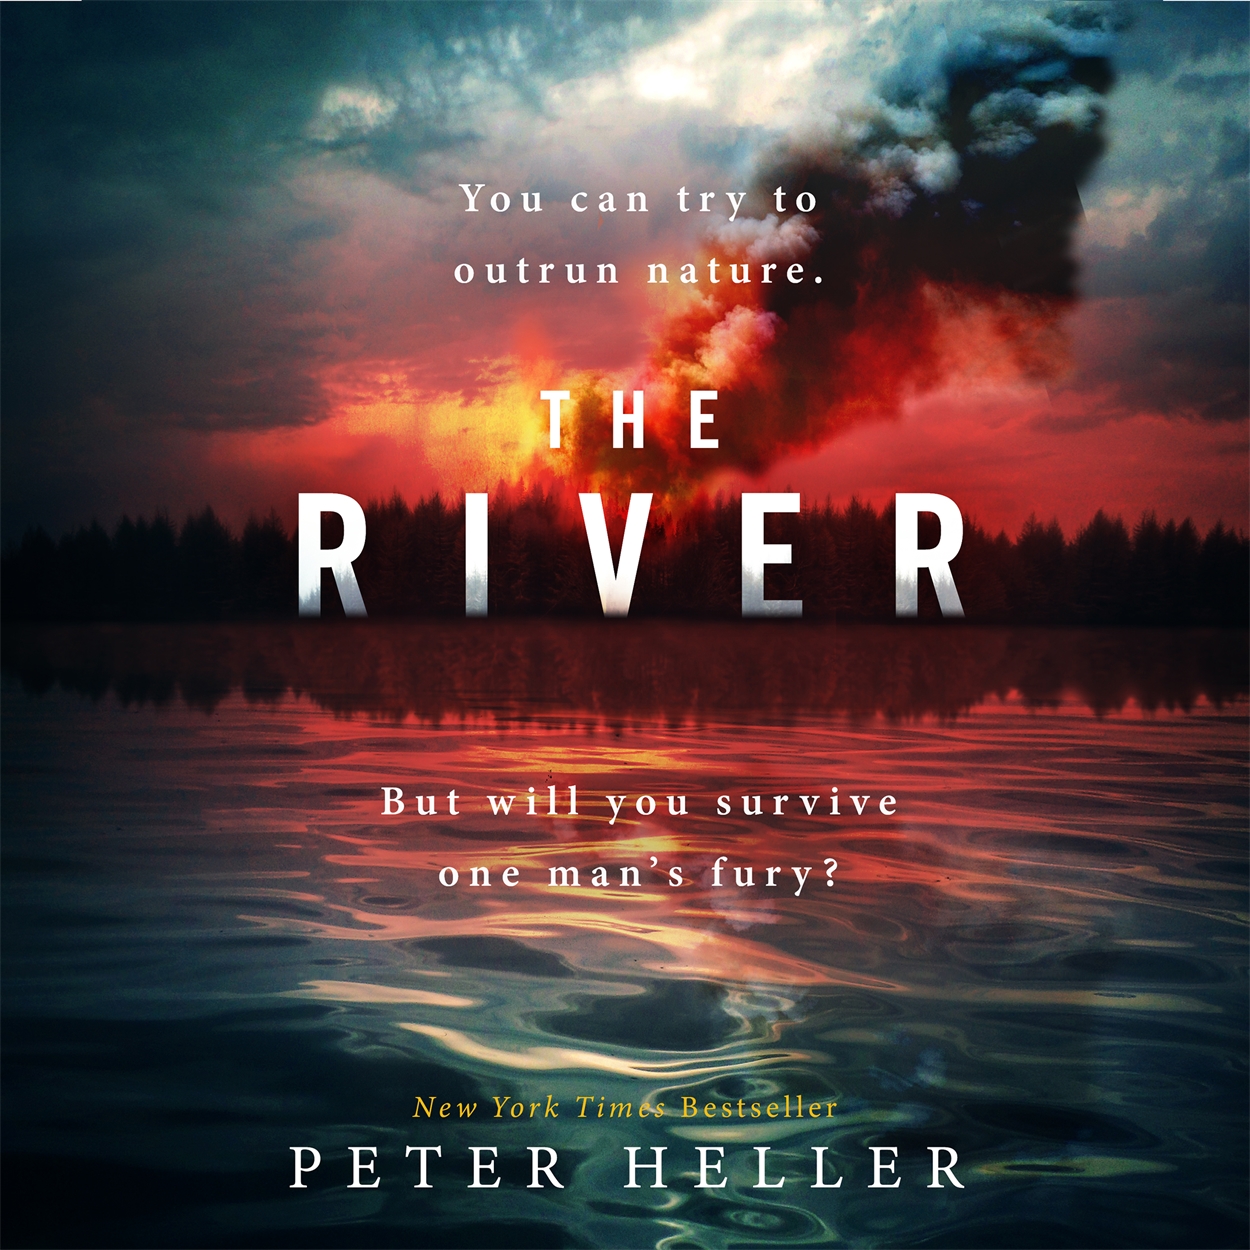 the river by peter heller